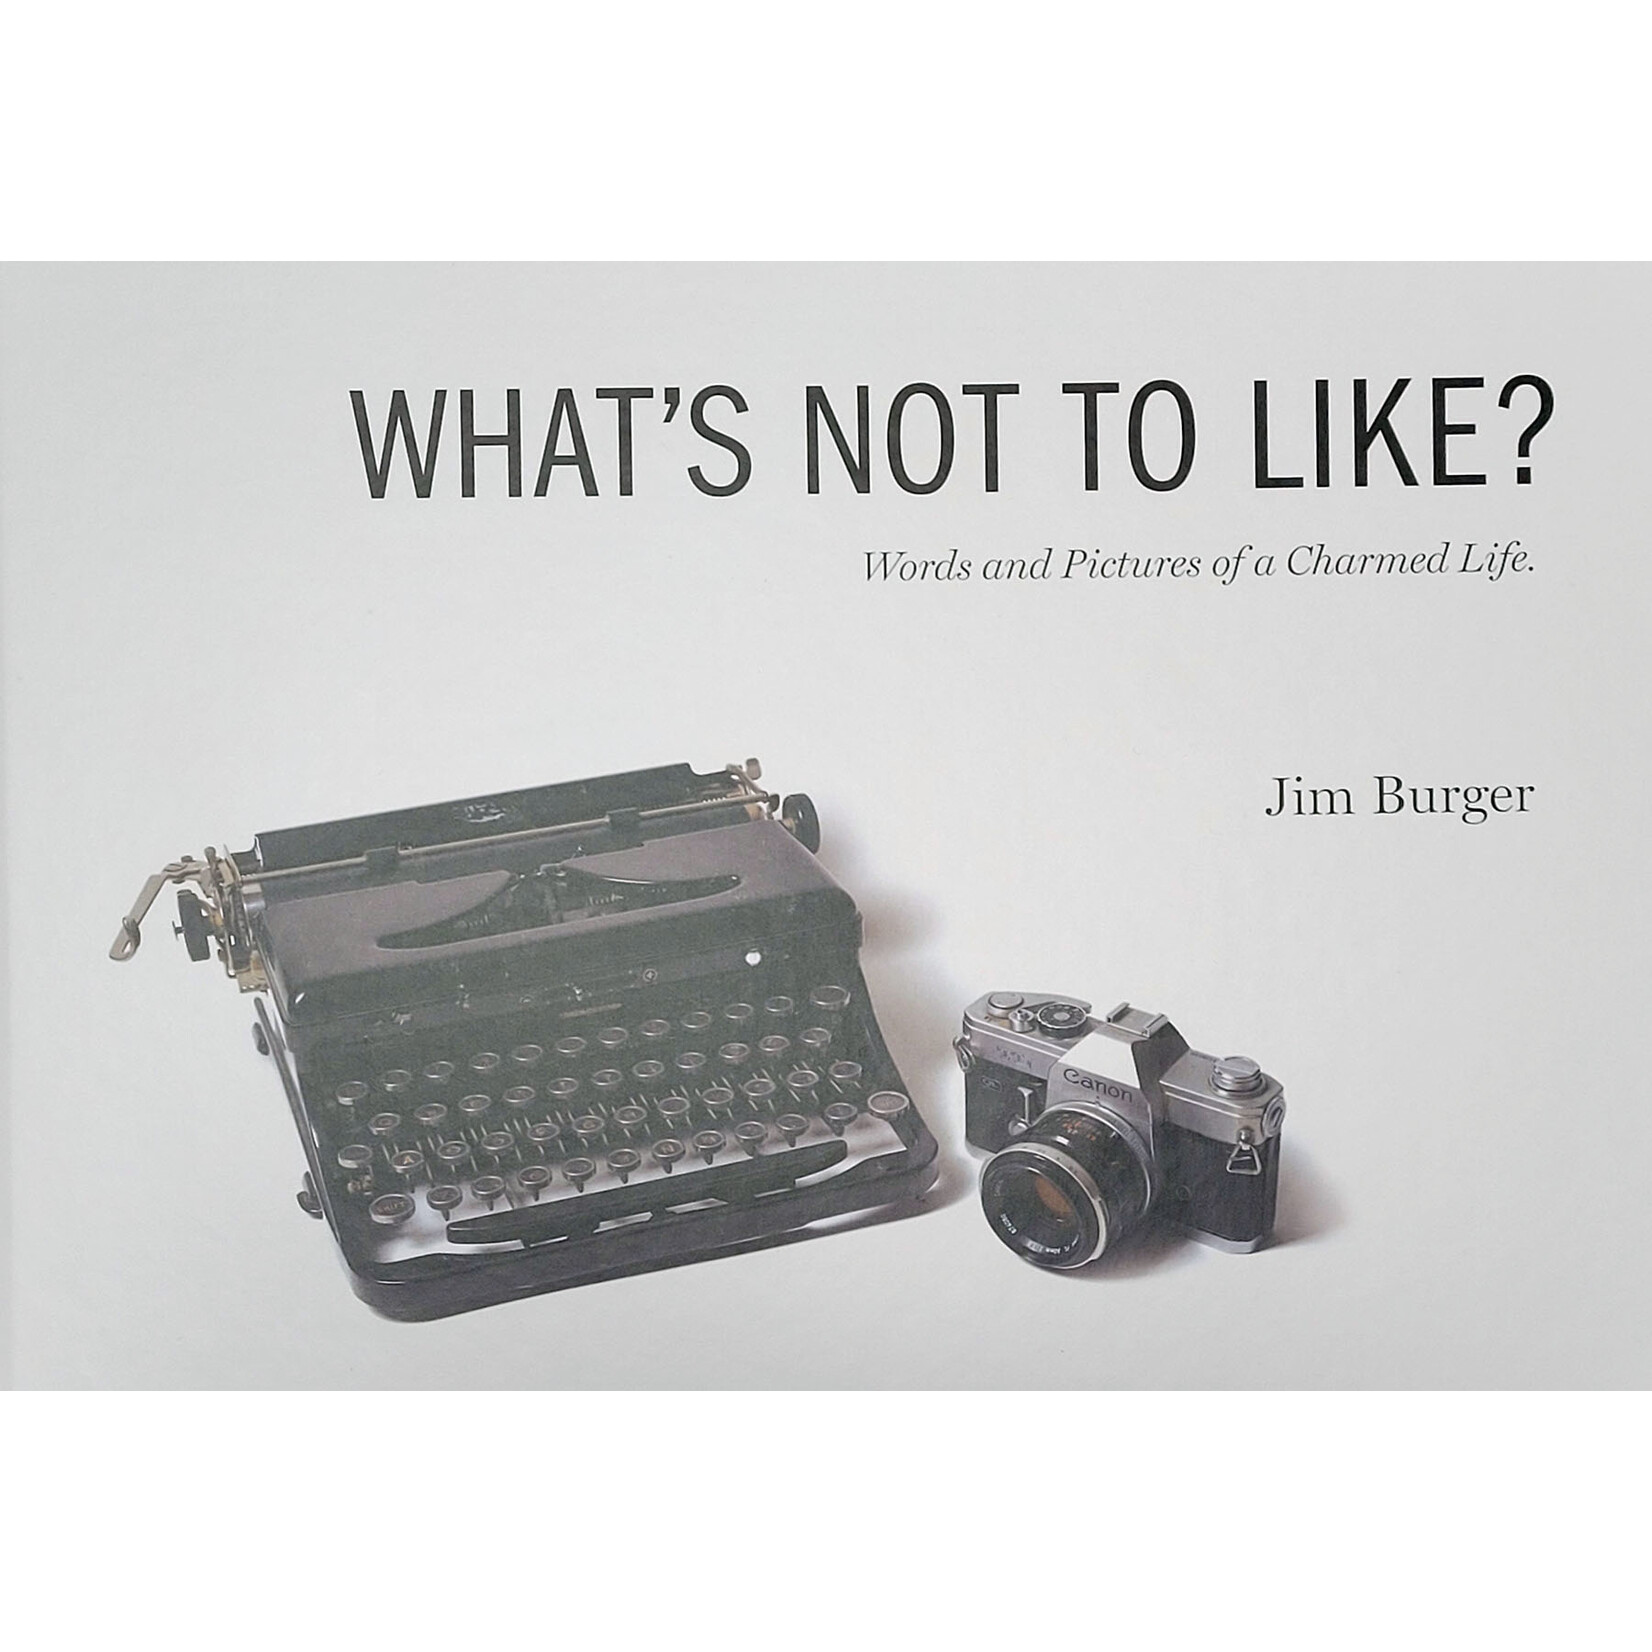 What's Not to Like? by Jim Burger